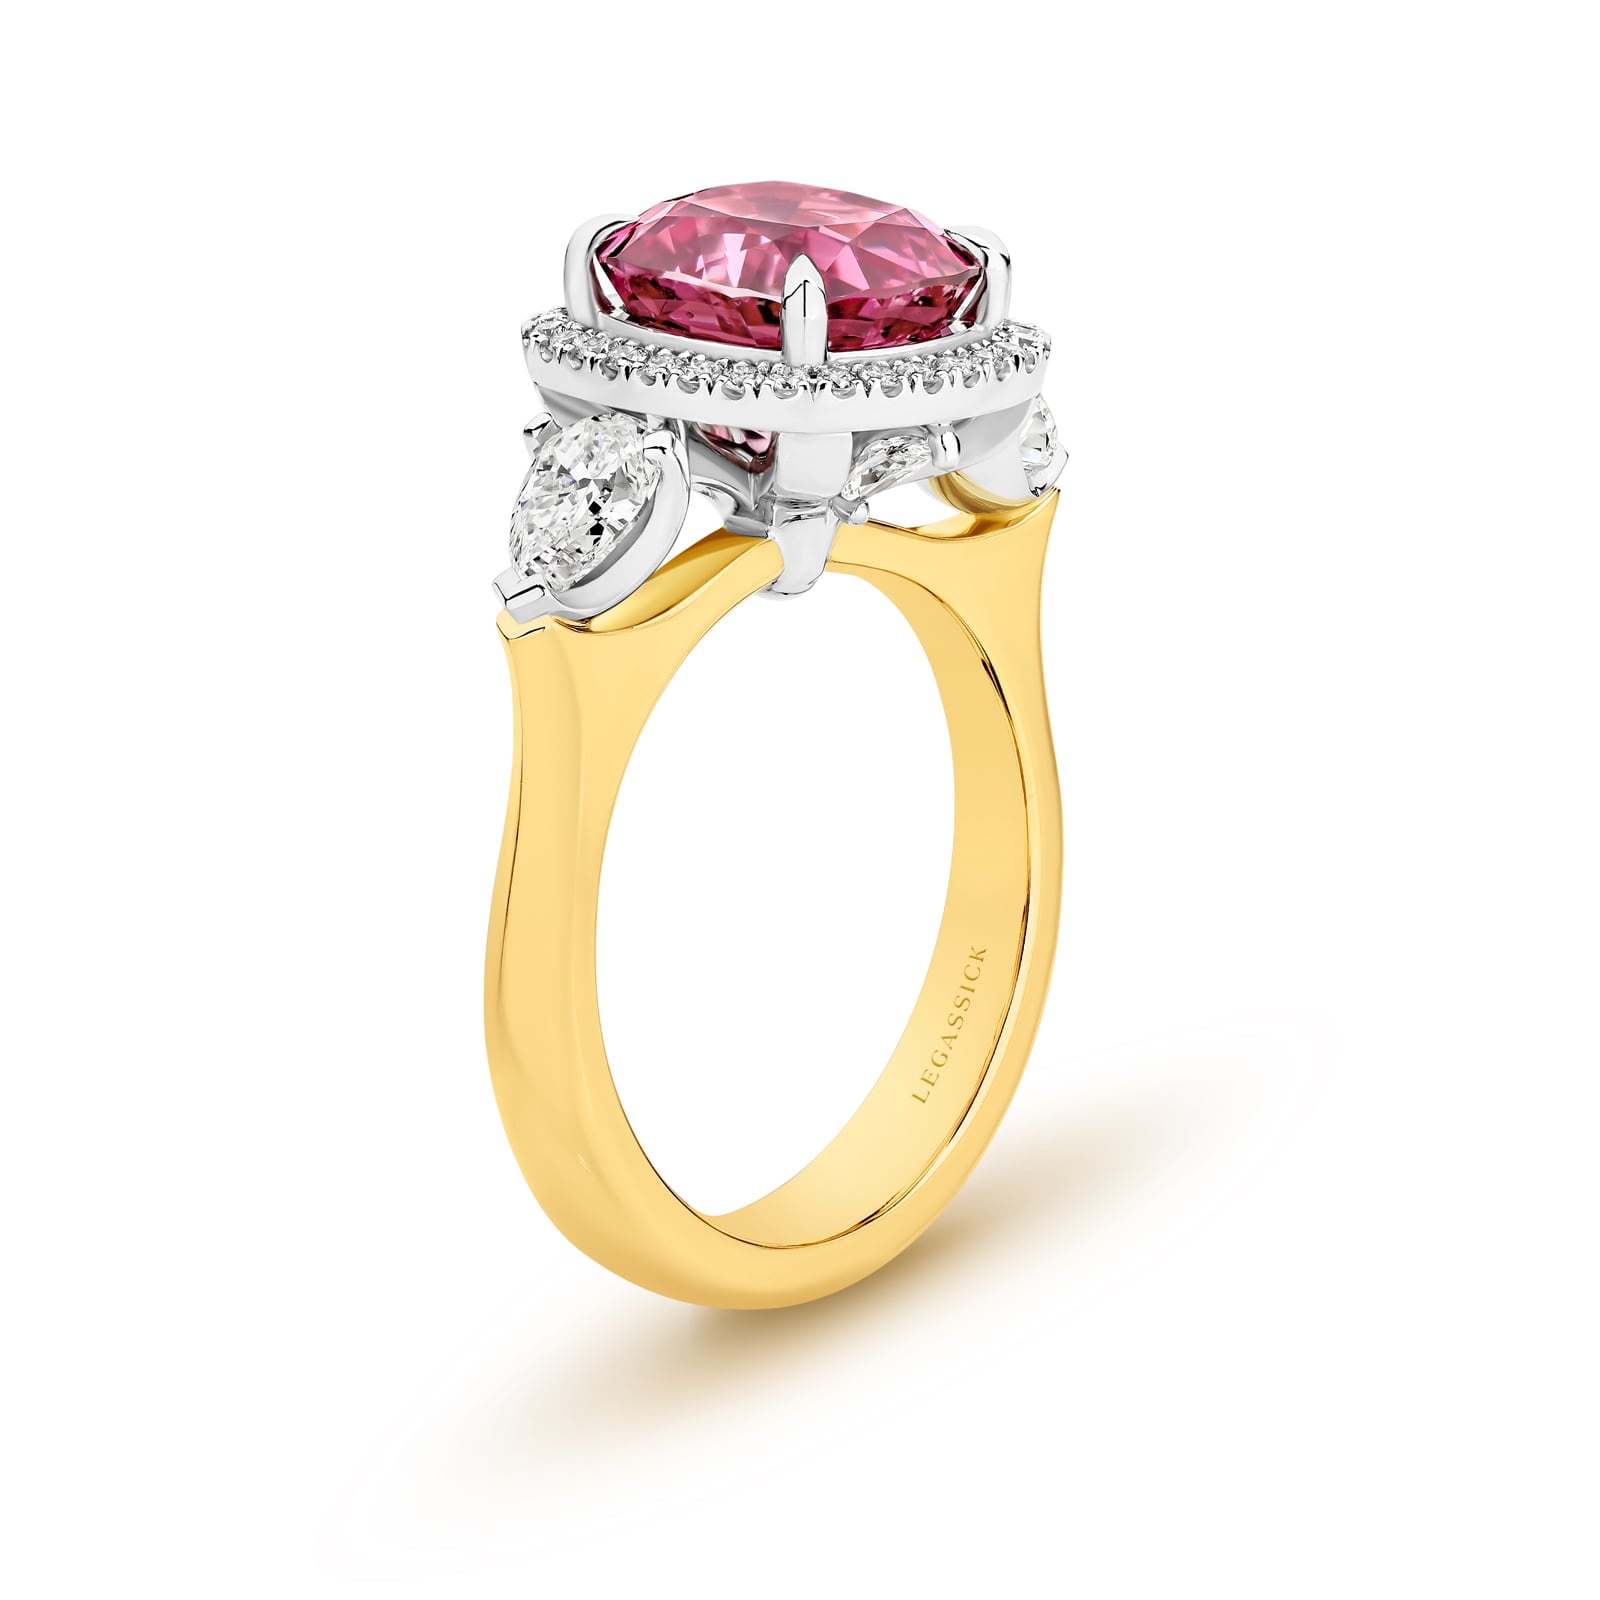 Victoria is a rare and highly desirable 4.16 carat pink Spinel and diamond ring. She was designed and handcrafted by LeGassick's Master Jewellers, Gold Coast, Australia.